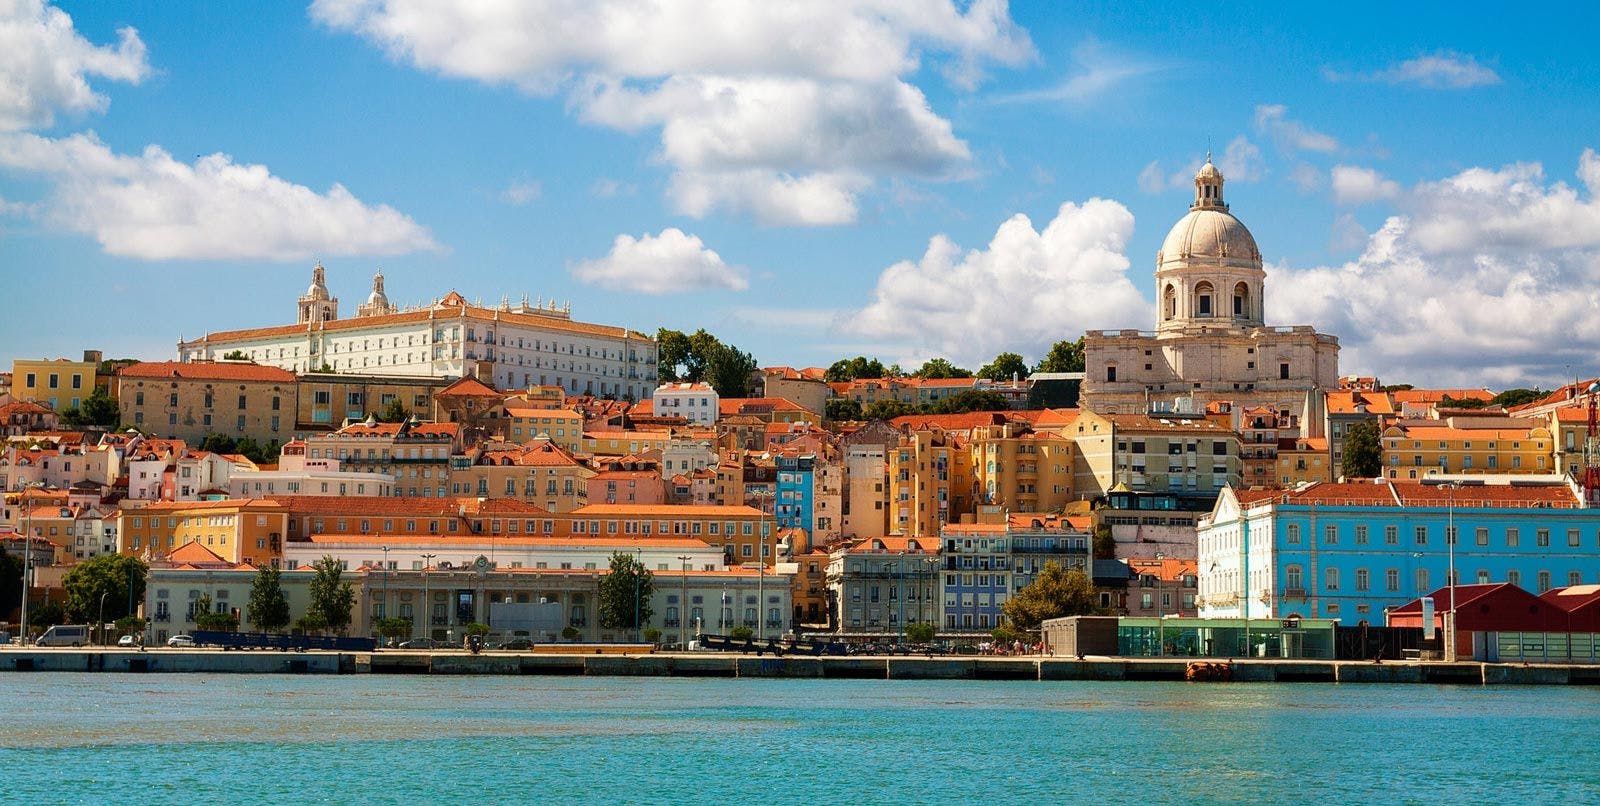 The skyline of Lisbon along the riverfront in Portugal